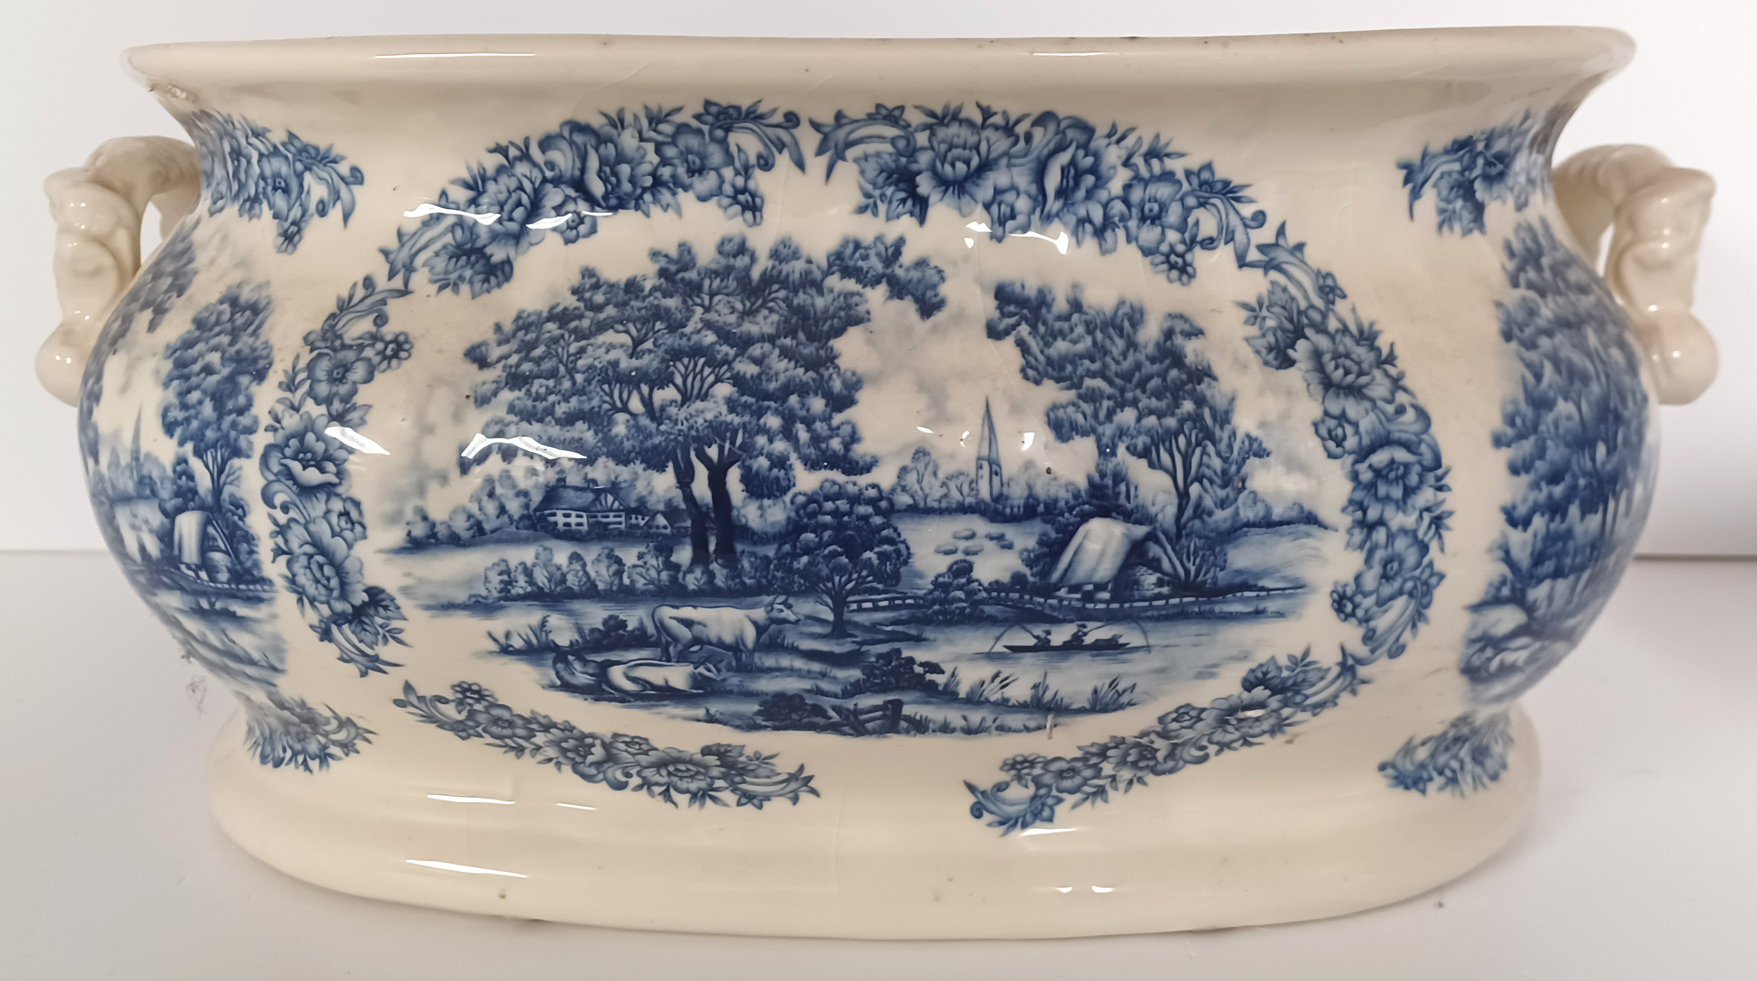 BLUE AND WHITE CHINA INC. SPODE ITALIAN, WILLOW PATTERN, MYOTT MEAKIN, IRONSTONE CACHEPOT FOOT BATH  - Image 3 of 3